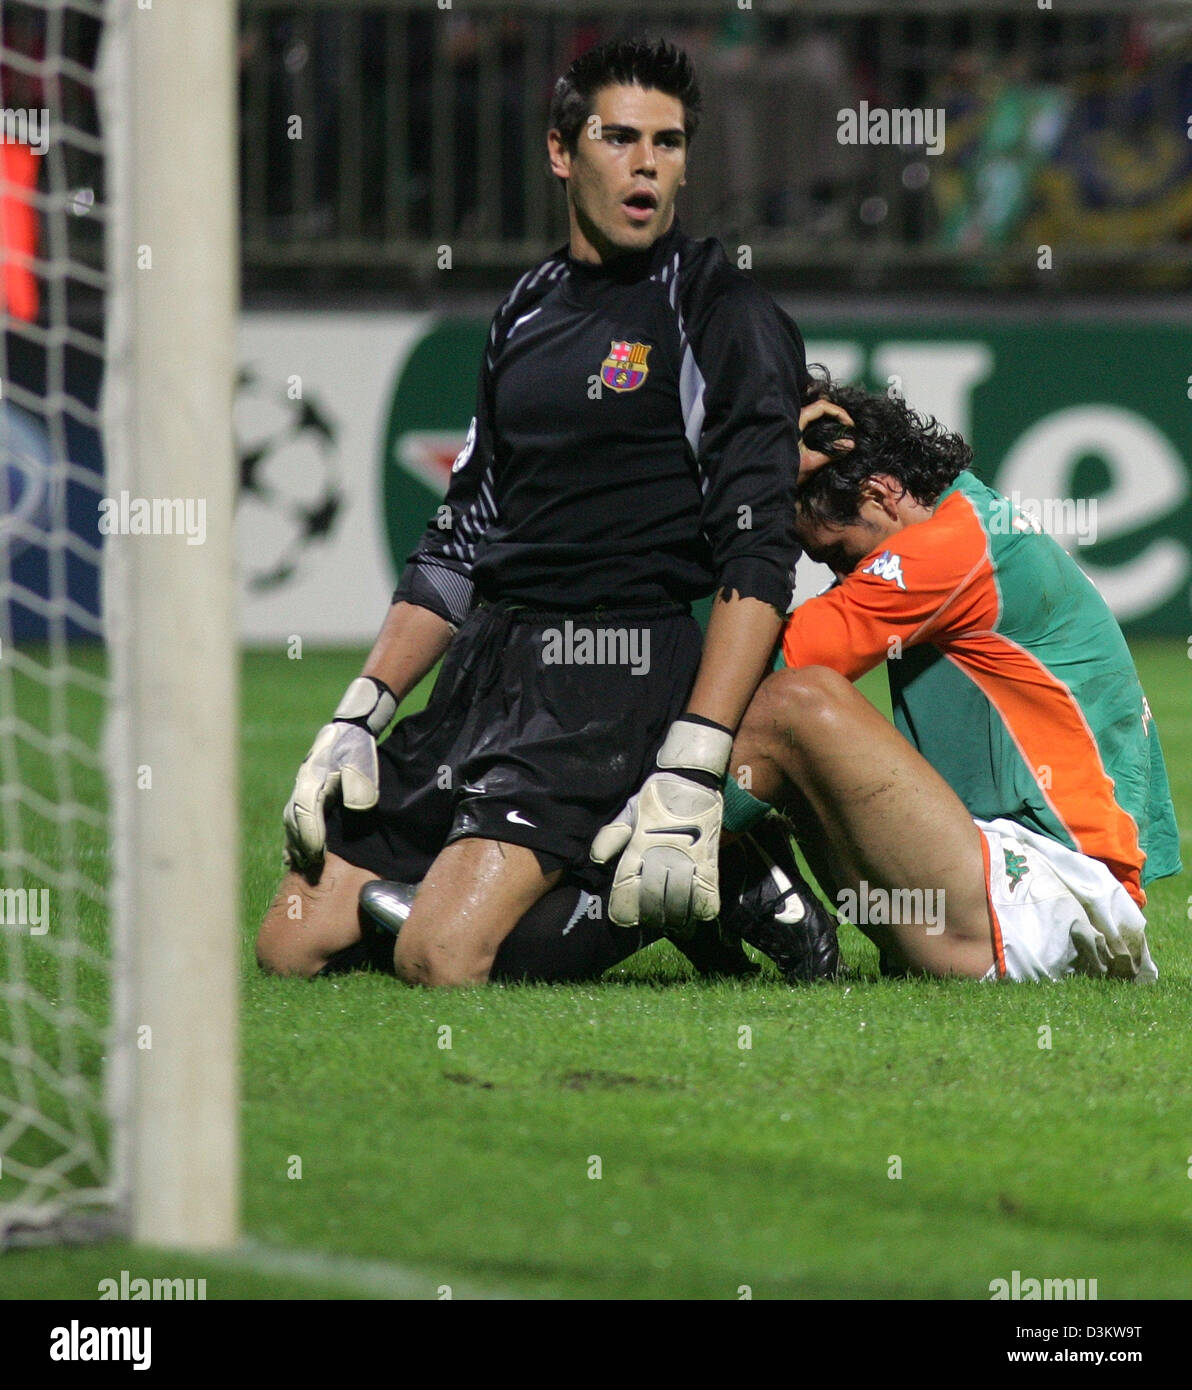 (dpa) -The picture shows goalkeeper of Spanish soccer club FC Barcelona Victor Valdes (L) and forward Nelson Valdez of German Bundesliga club Werder Bremen after missing a goal during the UEFA Champions League SV Werder Bremen vs FC Barcelona at the Weser stadium in Bremen, Germany, Wednesday 14 September 2005. Werder Bremen intended to kick off the Champions League against the Spa Stock Photo